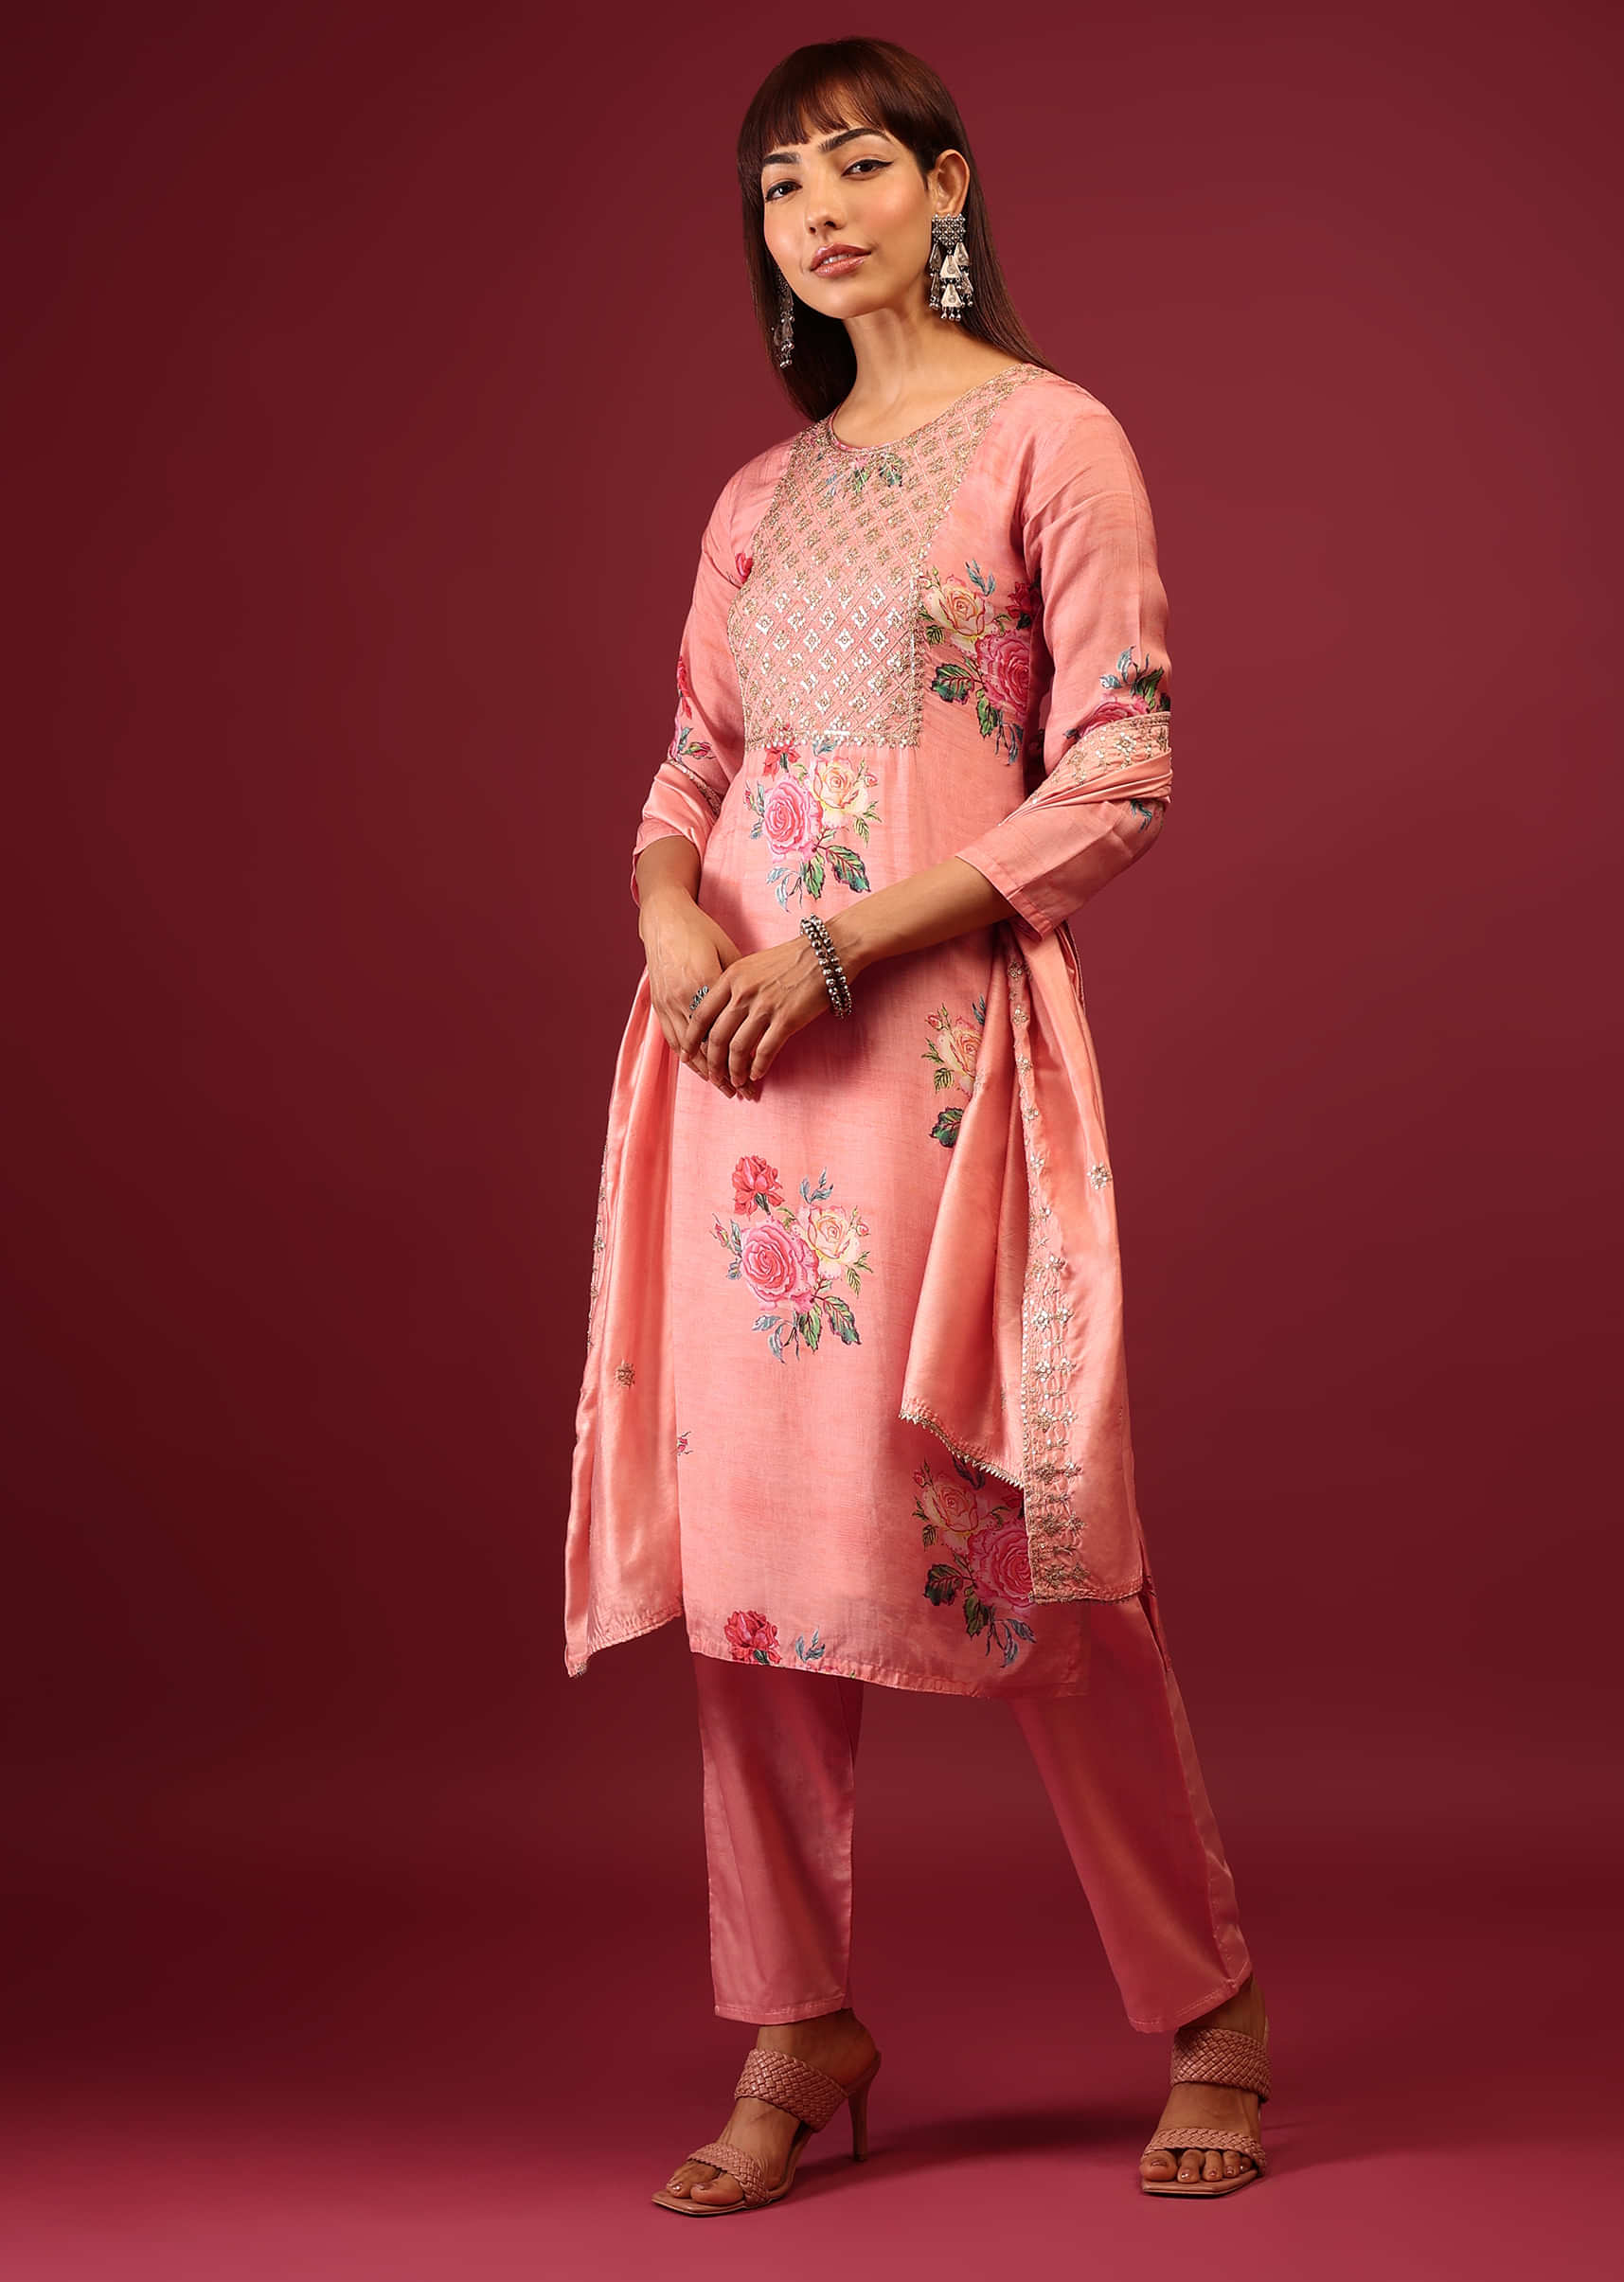 Salmon Pink Floral Print Pant Suit In U Neckline And Zari & Sequin Embroidery